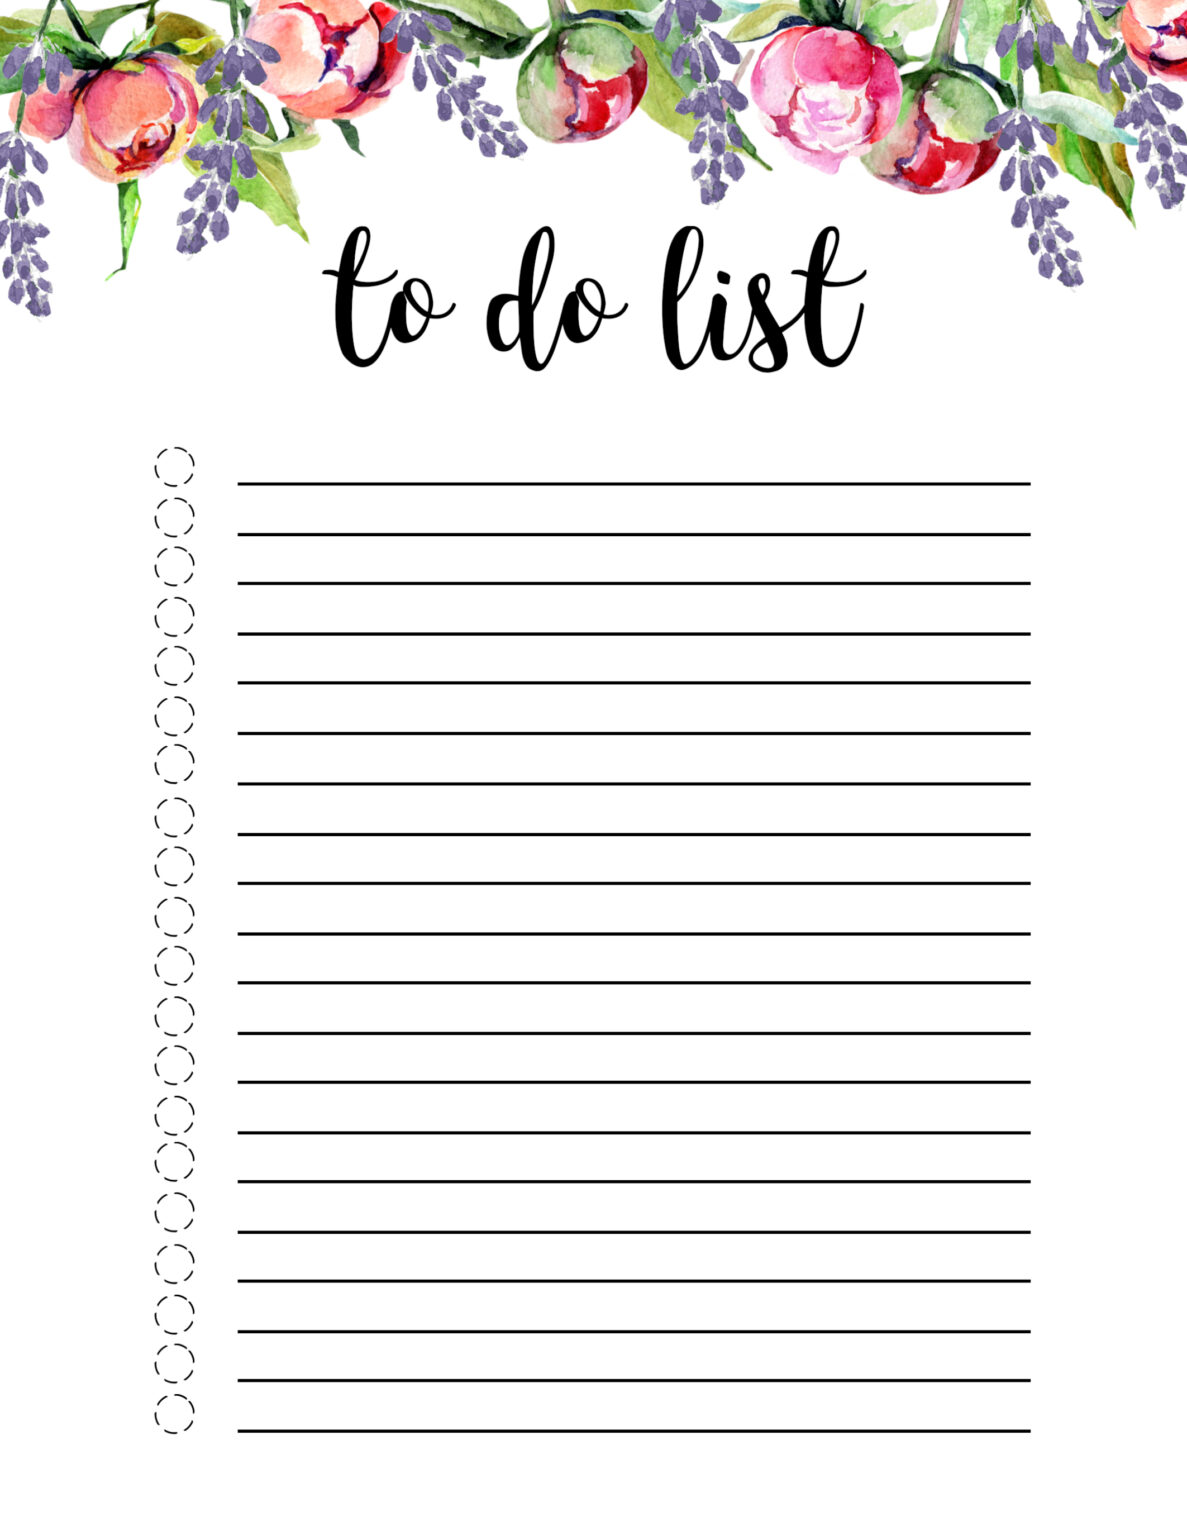 005-printable-to-do-list-template-ideas-best-free-for-word-in-blank-to-do-list-template-best